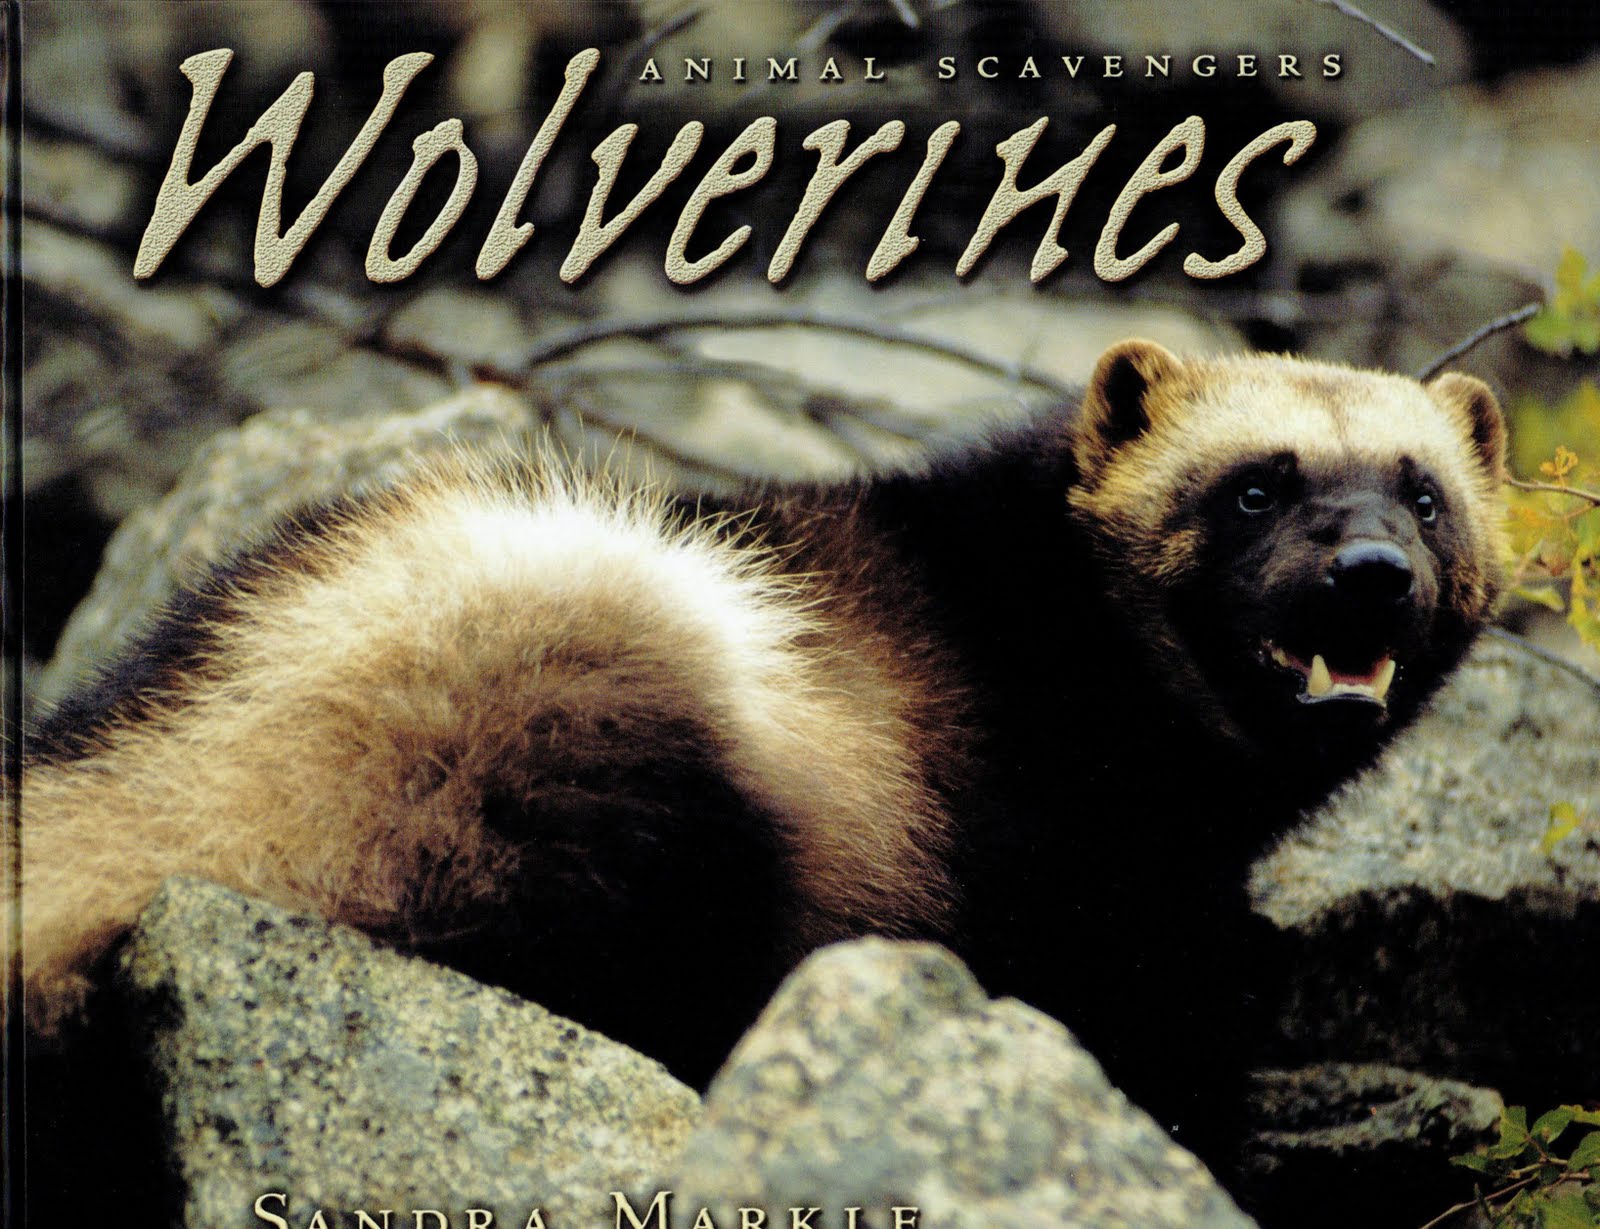 One example is ANIMAL SCAVENGERS: WOLVERINES (Lerner, 2005) which was ...